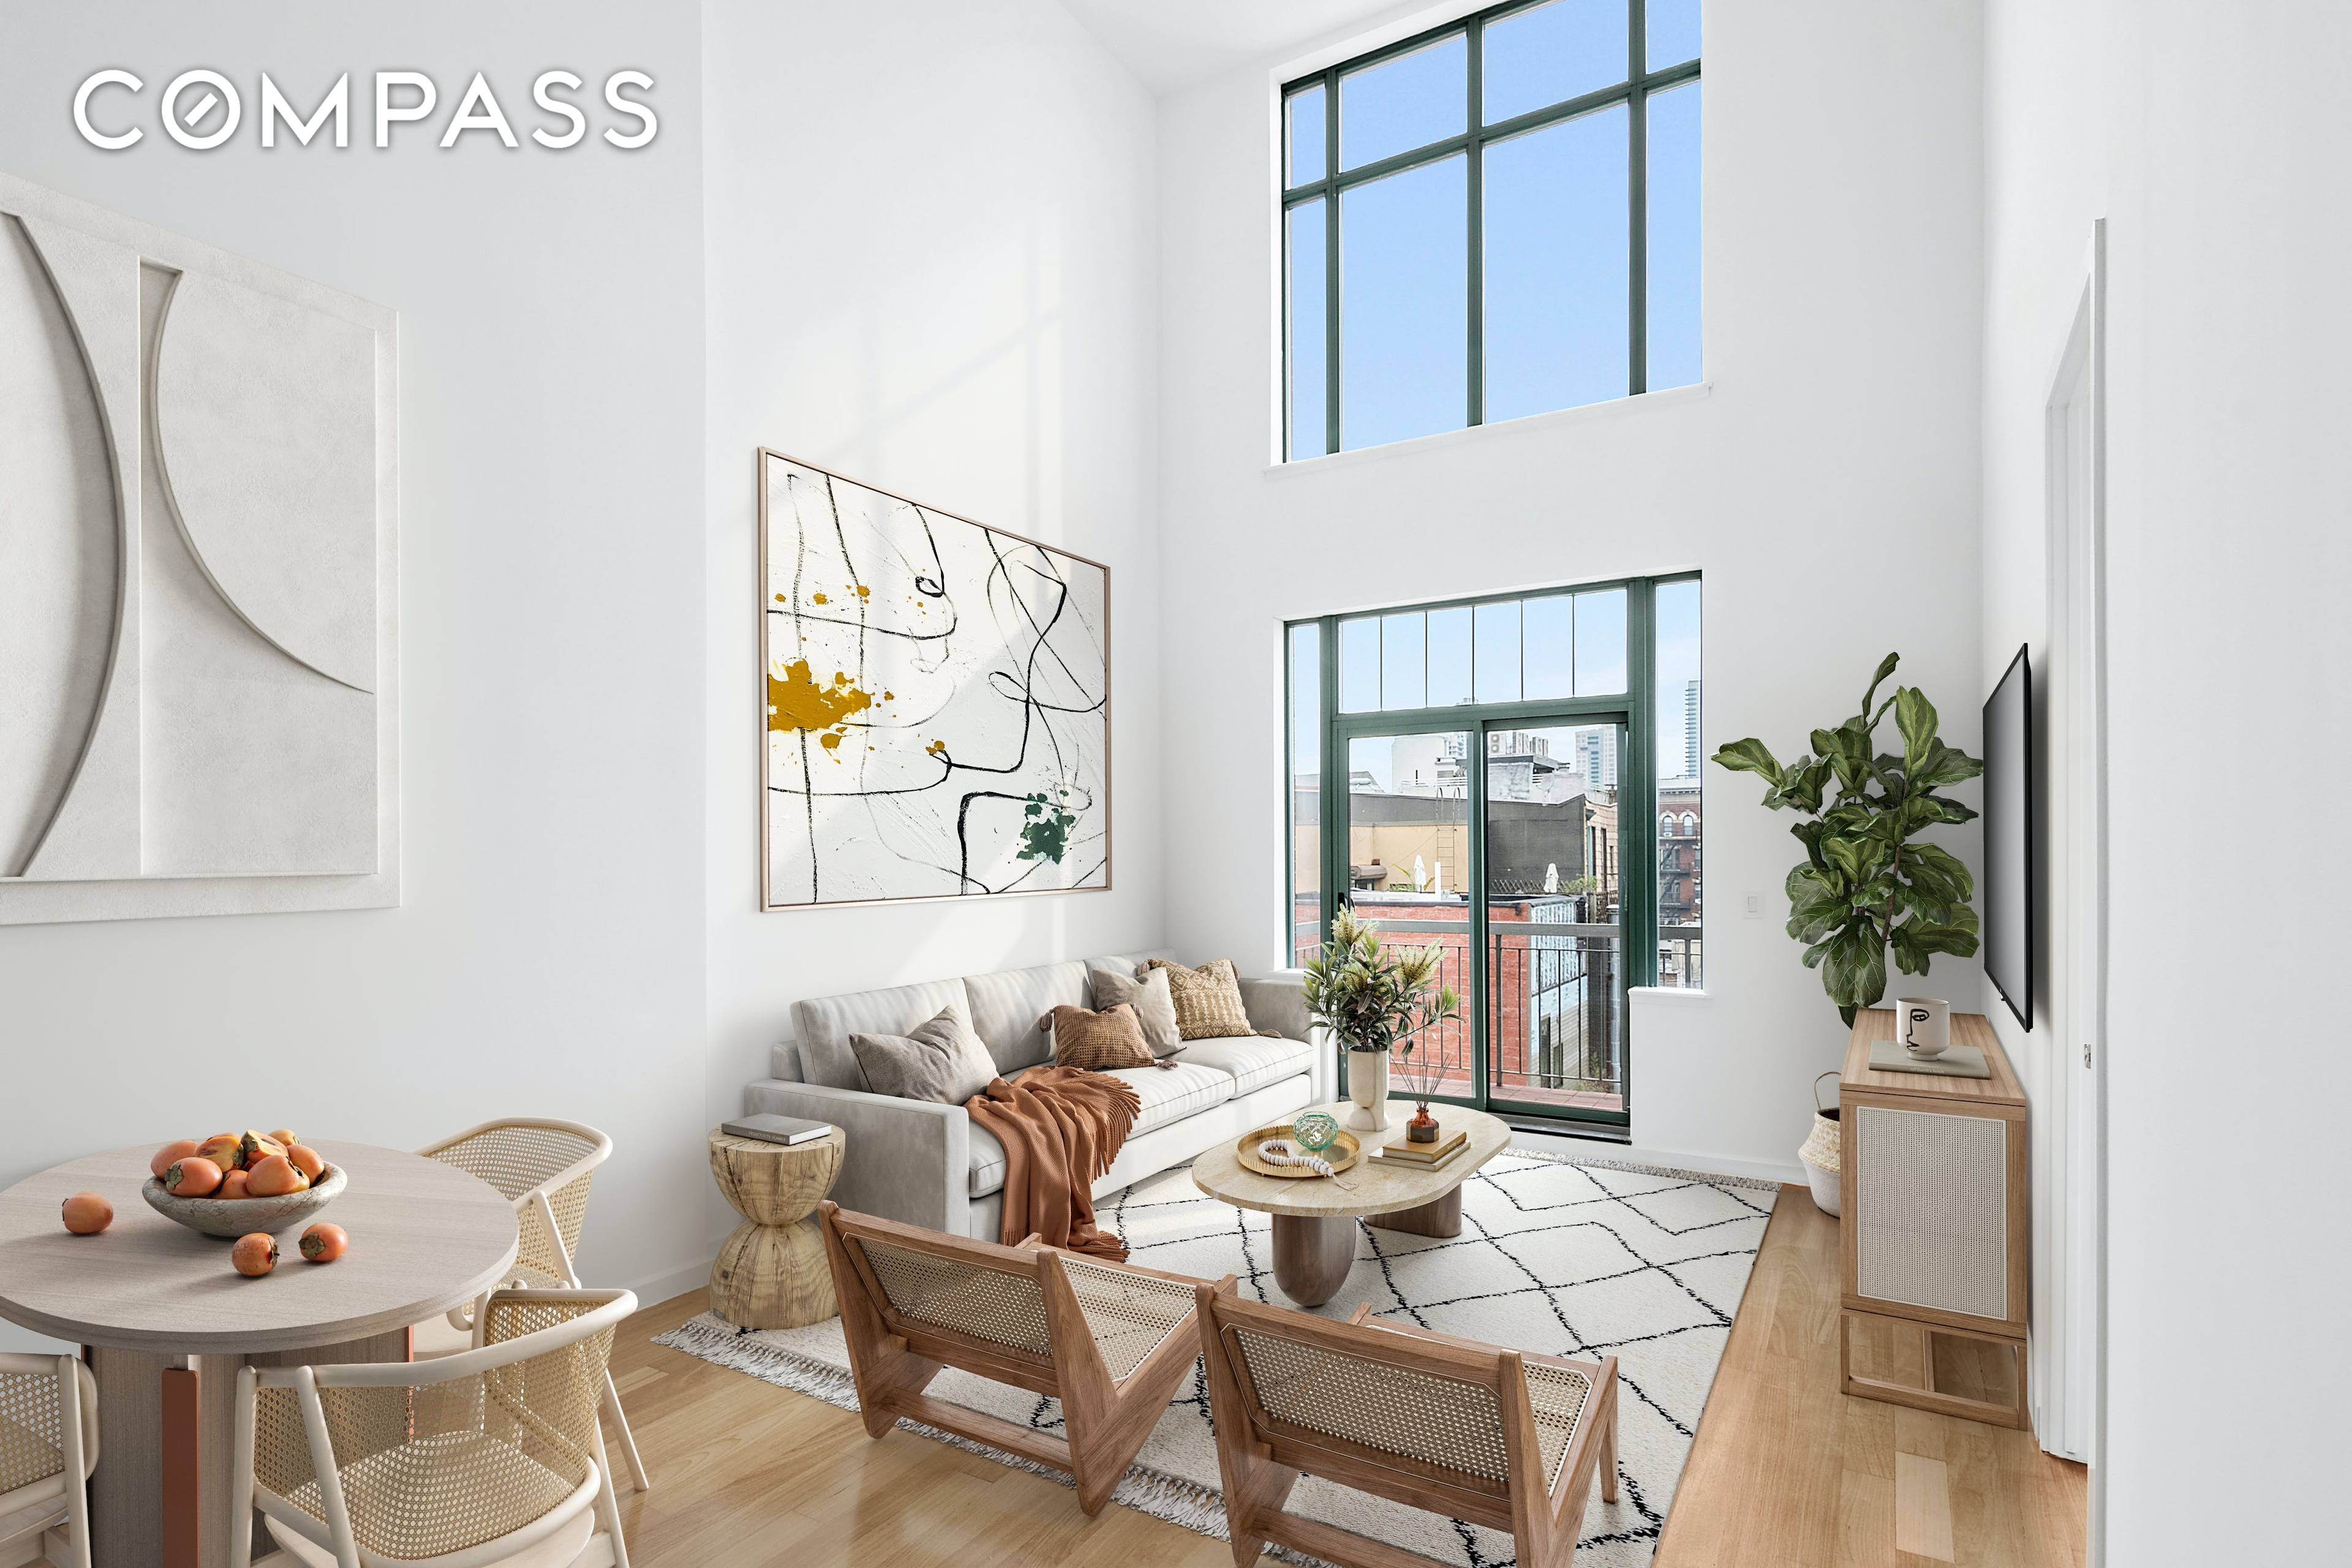 In the Heart of Williamsburg, this gorgeous, loft like duplex with 2 private outdoor spaces and sweeping Manhattan skyline views is now available.